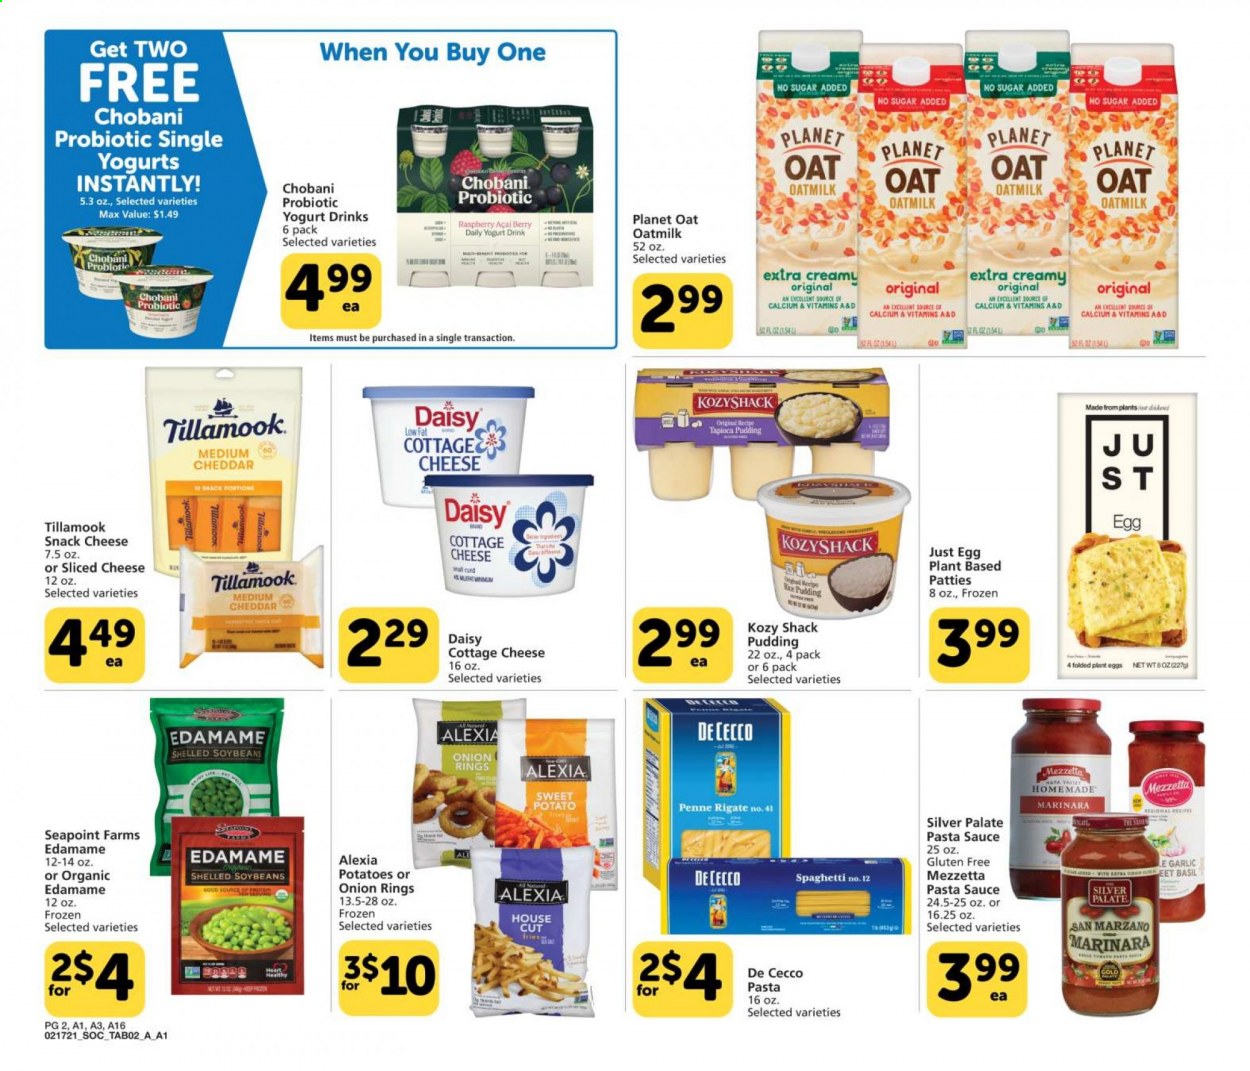 thumbnail - Albertsons Flyer - 02/17/2021 - 03/09/2021 - Sales products - Edamame, sweet potato, onion rings, sauce, cottage cheese, sliced cheese, cheddar, cheese, pudding, yoghurt, probiotic yoghurt, Chobani, yoghurt drink, oat milk, eggs, snack, oats, garlic, soybeans, spaghetti, penne, pasta sauce. Page 2.